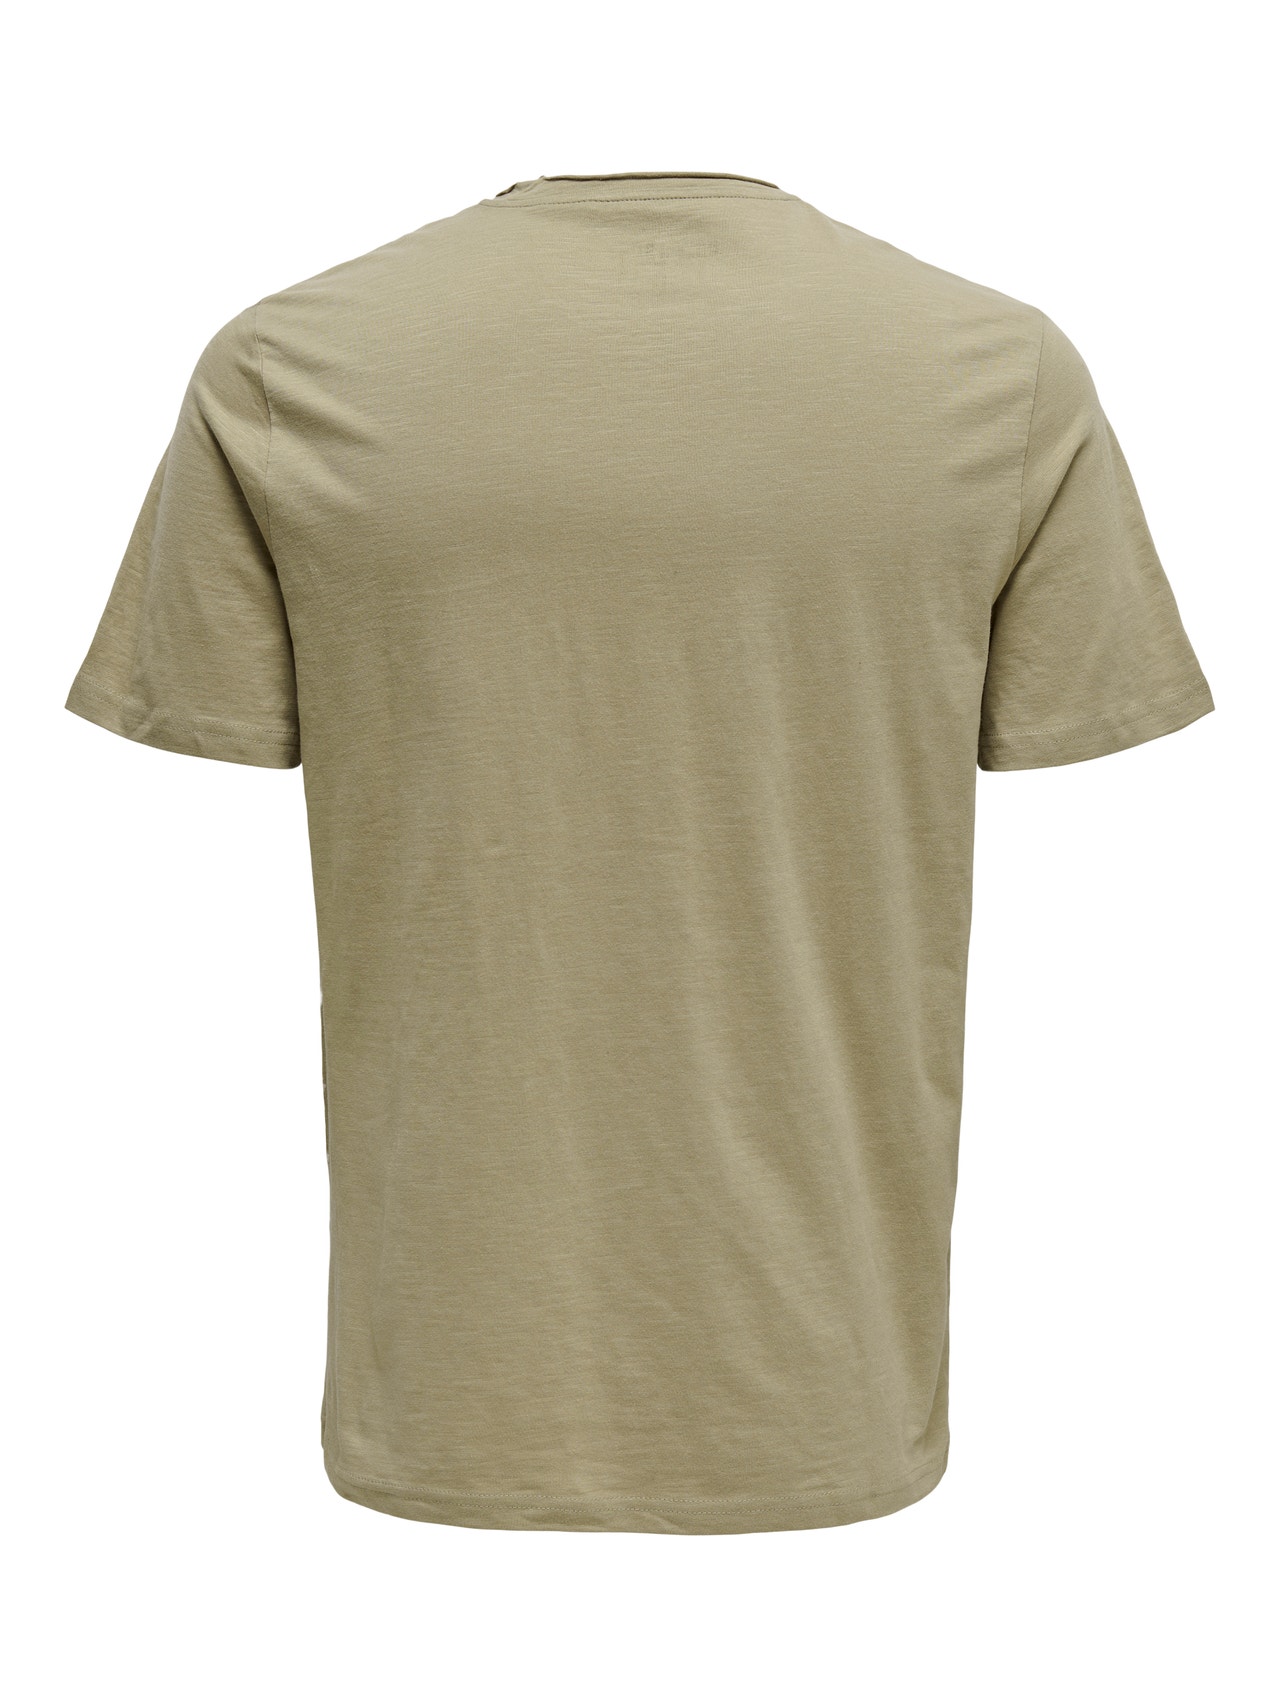 ONLY & SONS O-hals t-shirt med brystlomme -Chinchilla - 22022531